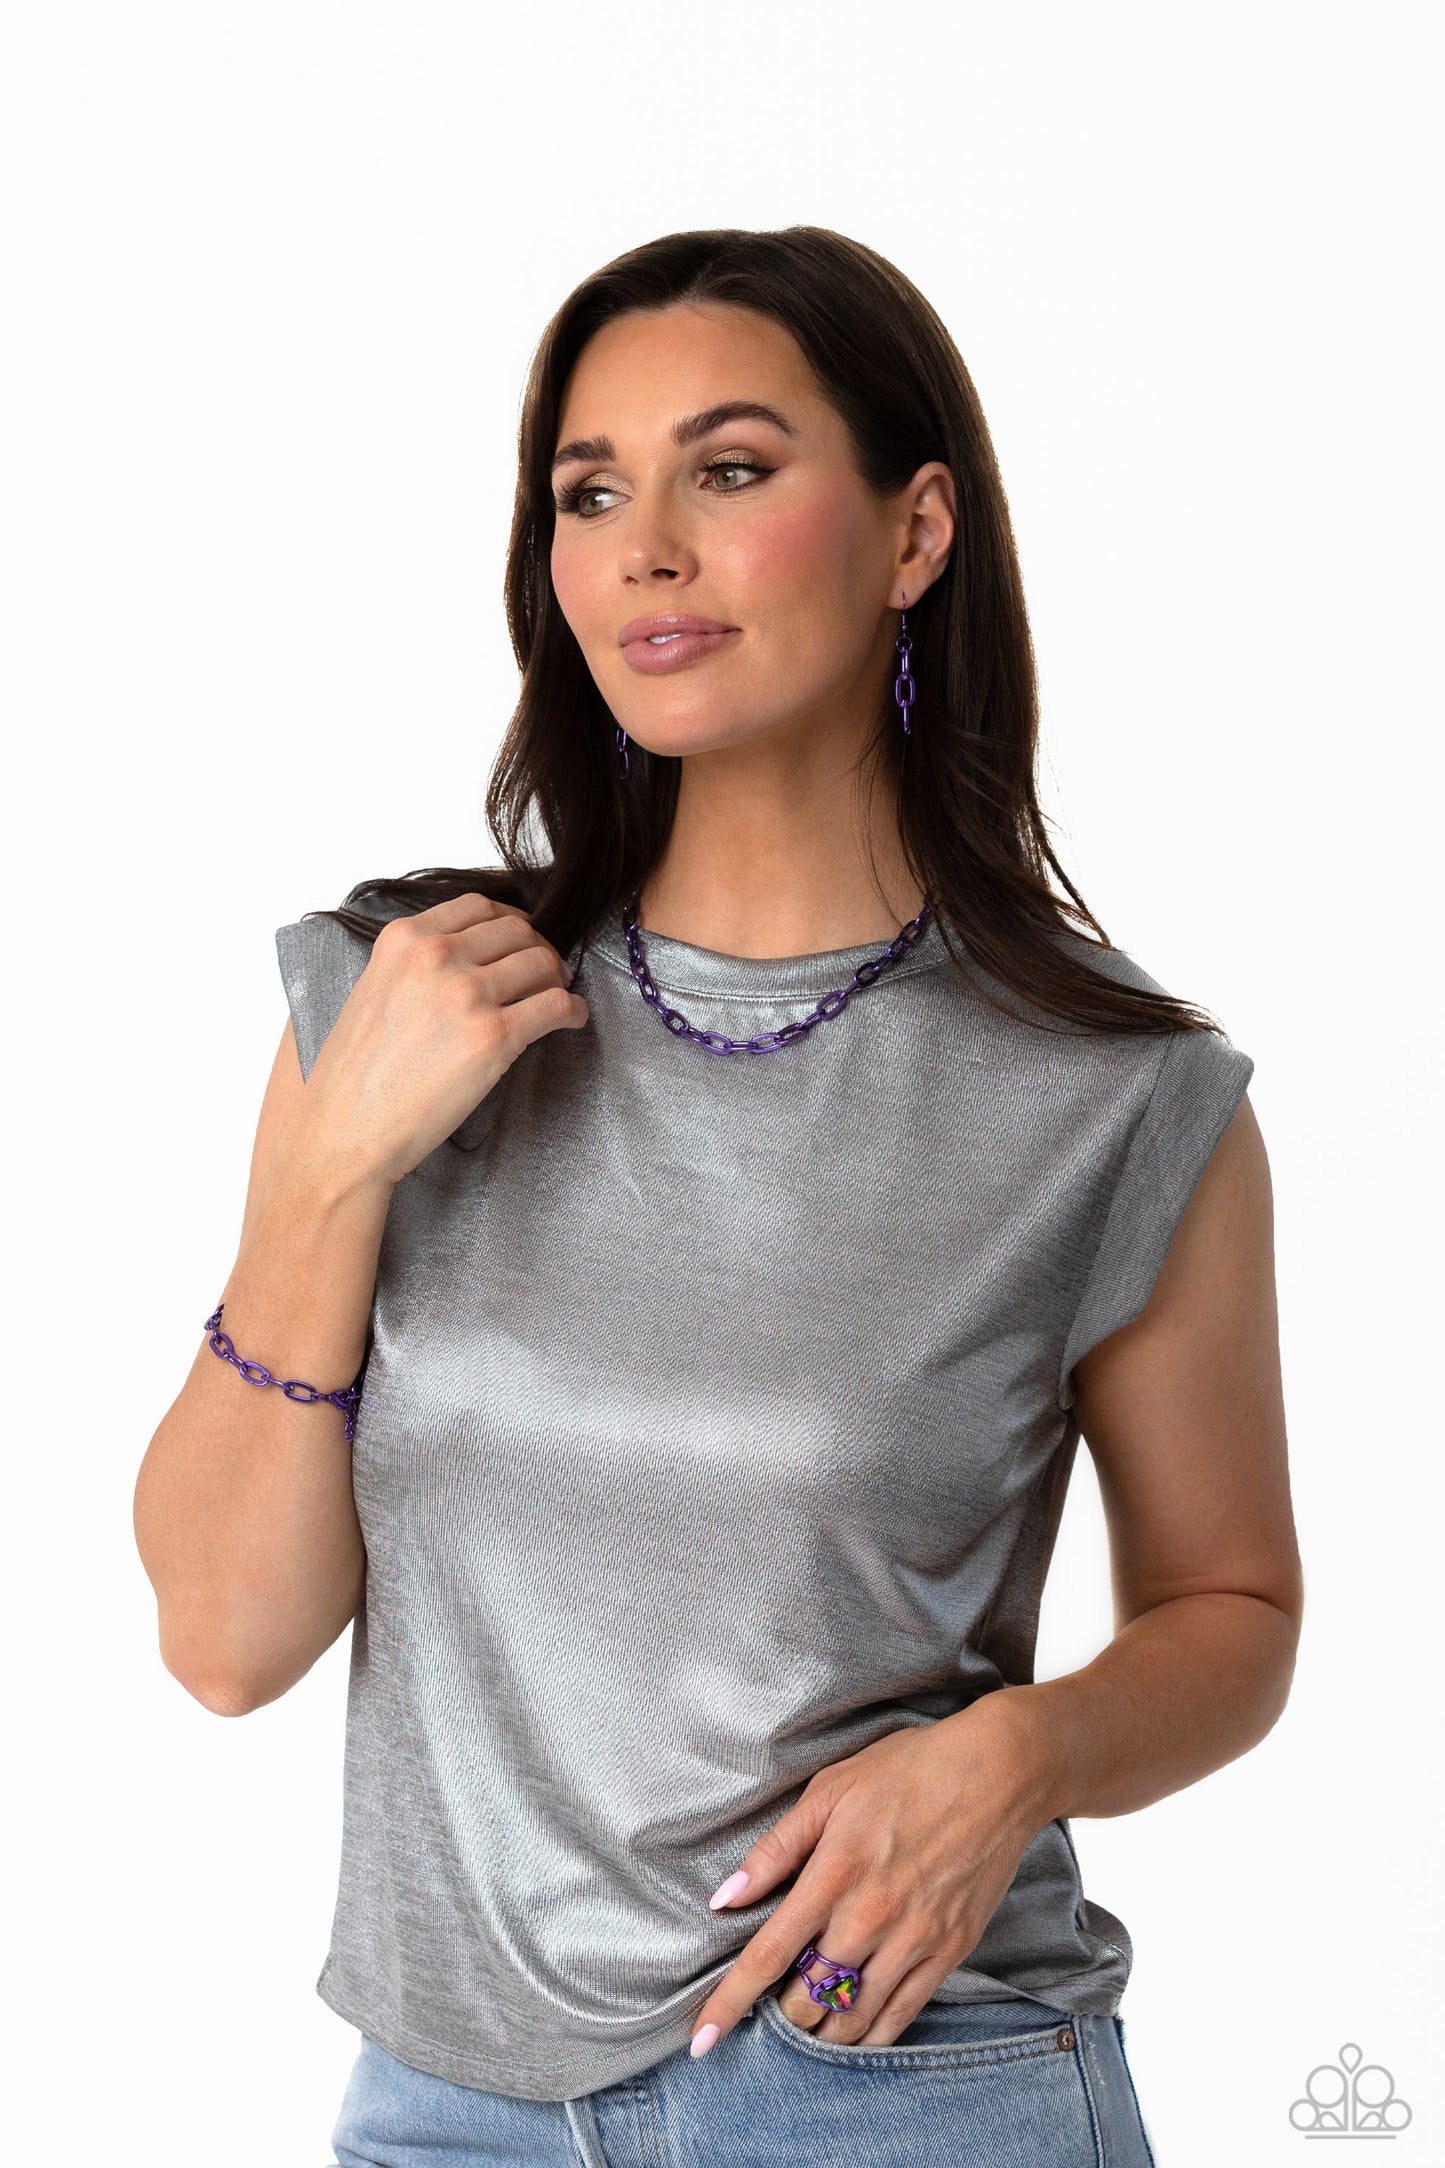 Paparazzi Accessories Exuberant Encore - Purple Oversized electric purple links connect below the collar for a bold urban look. Features an adjustable clasp closure. Sold as one individual choker necklace. Includes one pair of matching earrings. Get The C